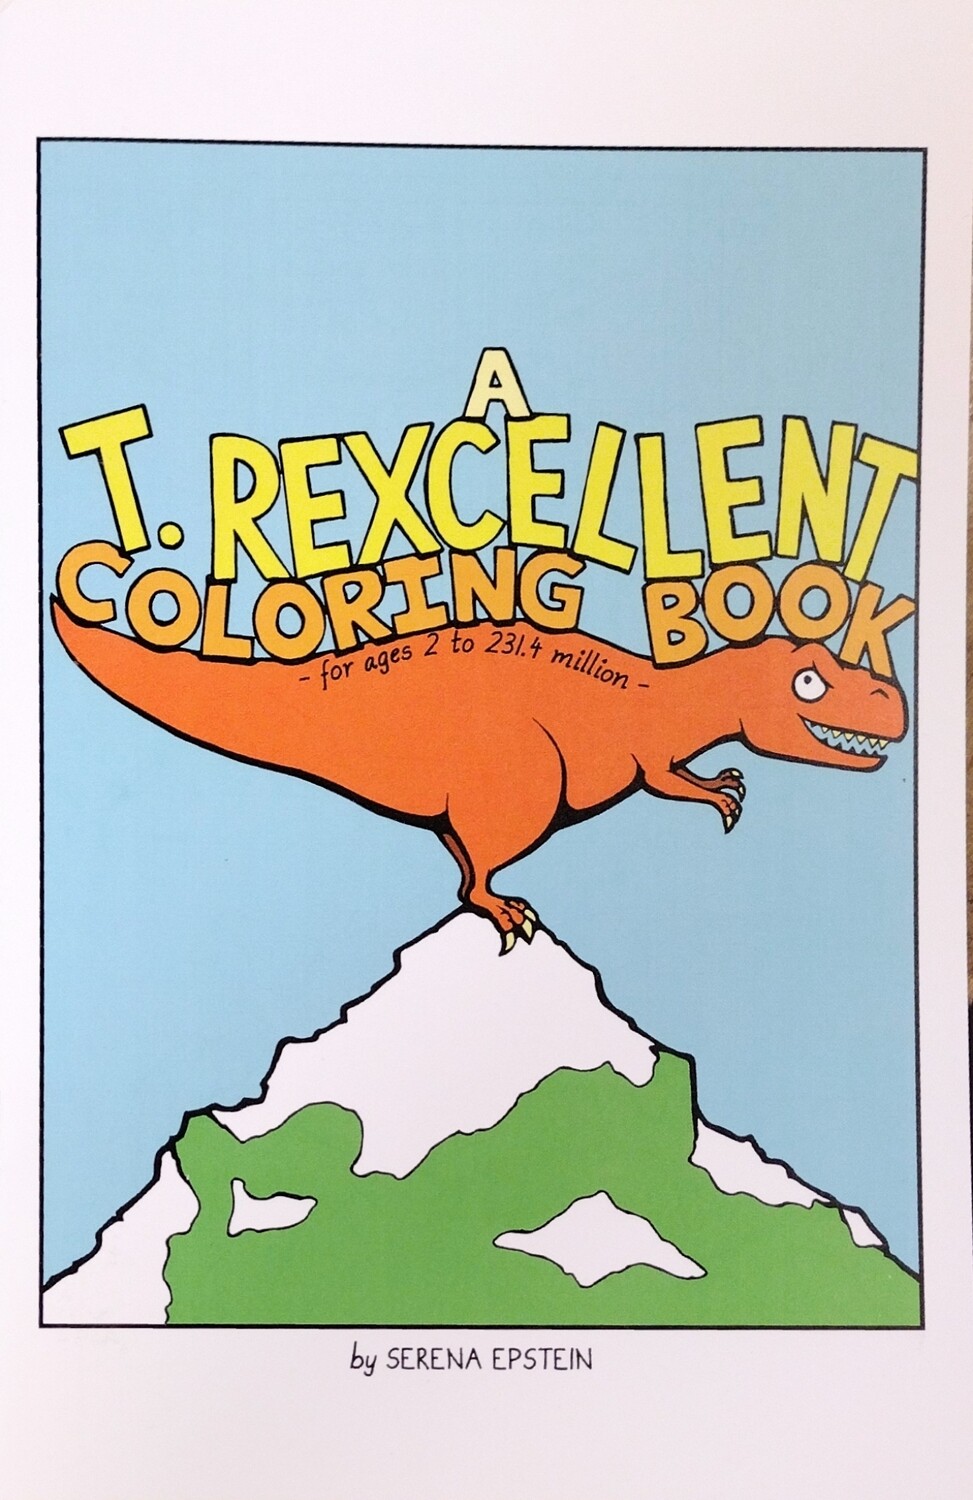 A T. Rexcellent - Coloring Book by Serena Stein